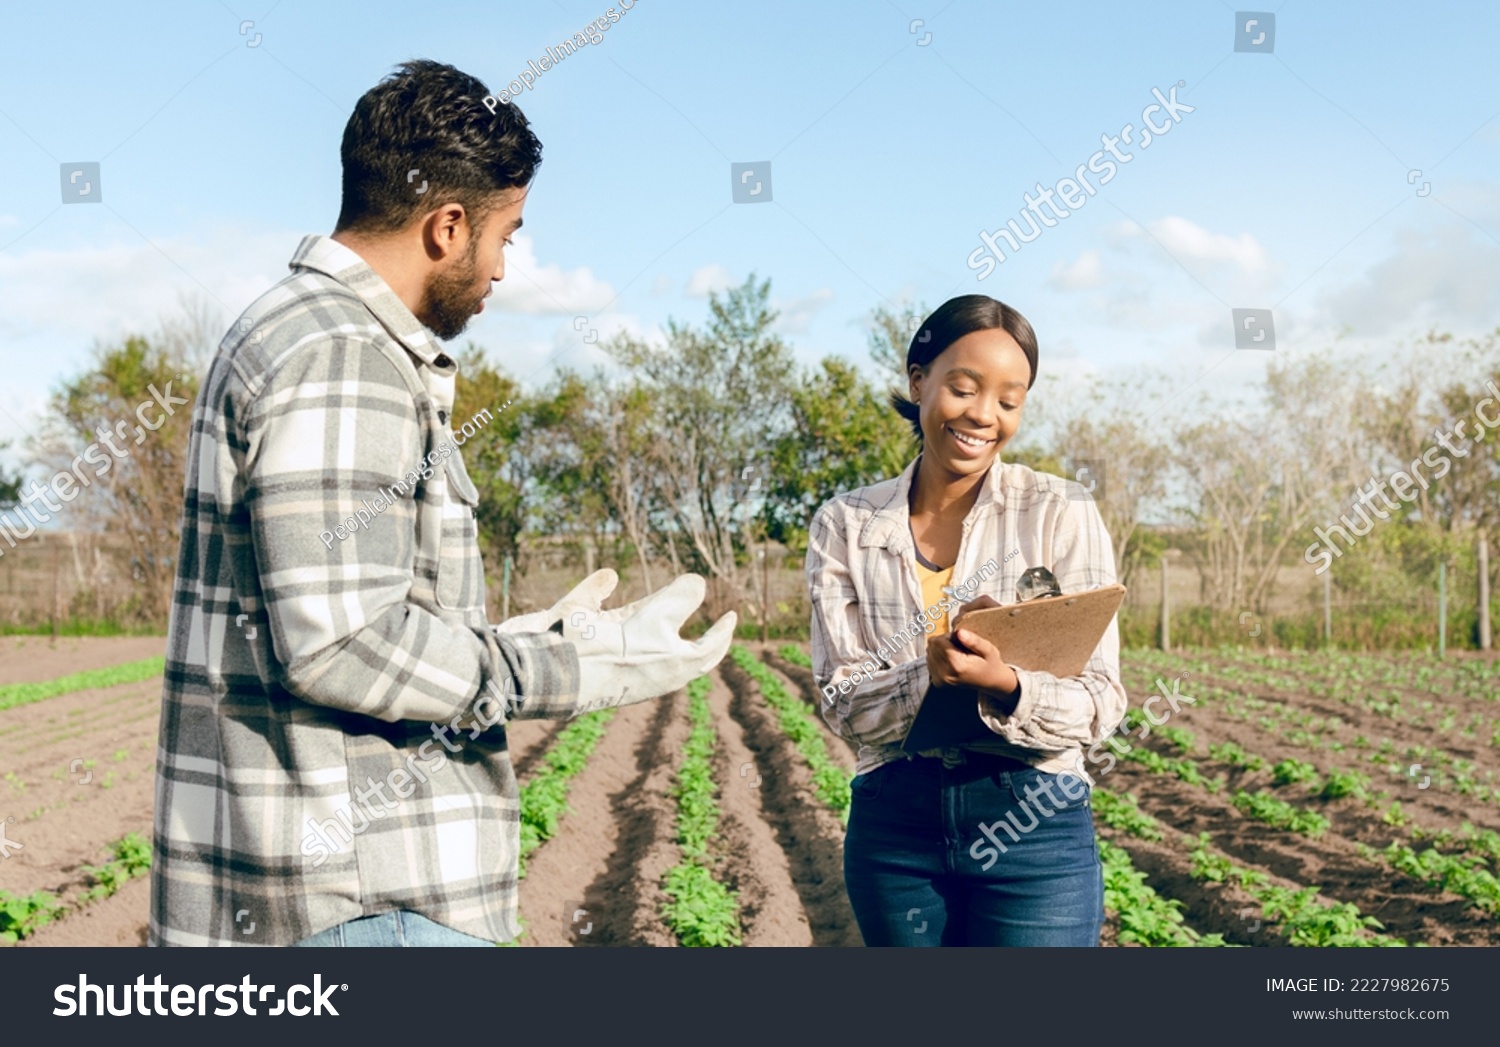 Farm, farmer and woman with clipboard for agriculture, sustainability and organic produce inspection. Farming, small business and health inspector writing health, wheat and agreement check on field #2227982675